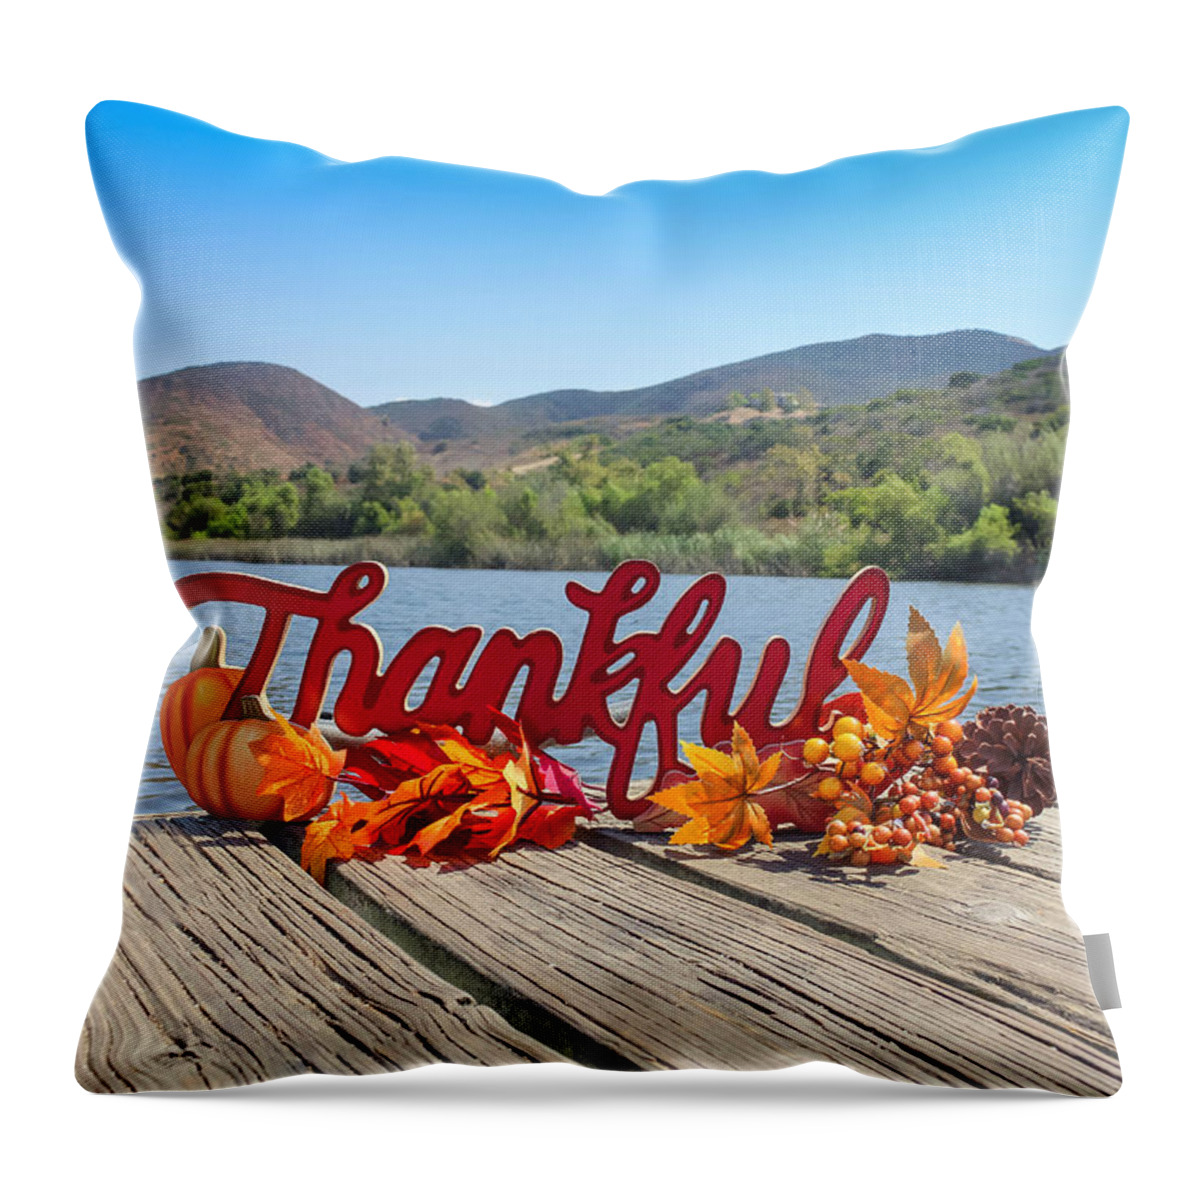 Thankful Throw Pillow featuring the photograph Thankful by Alison Frank